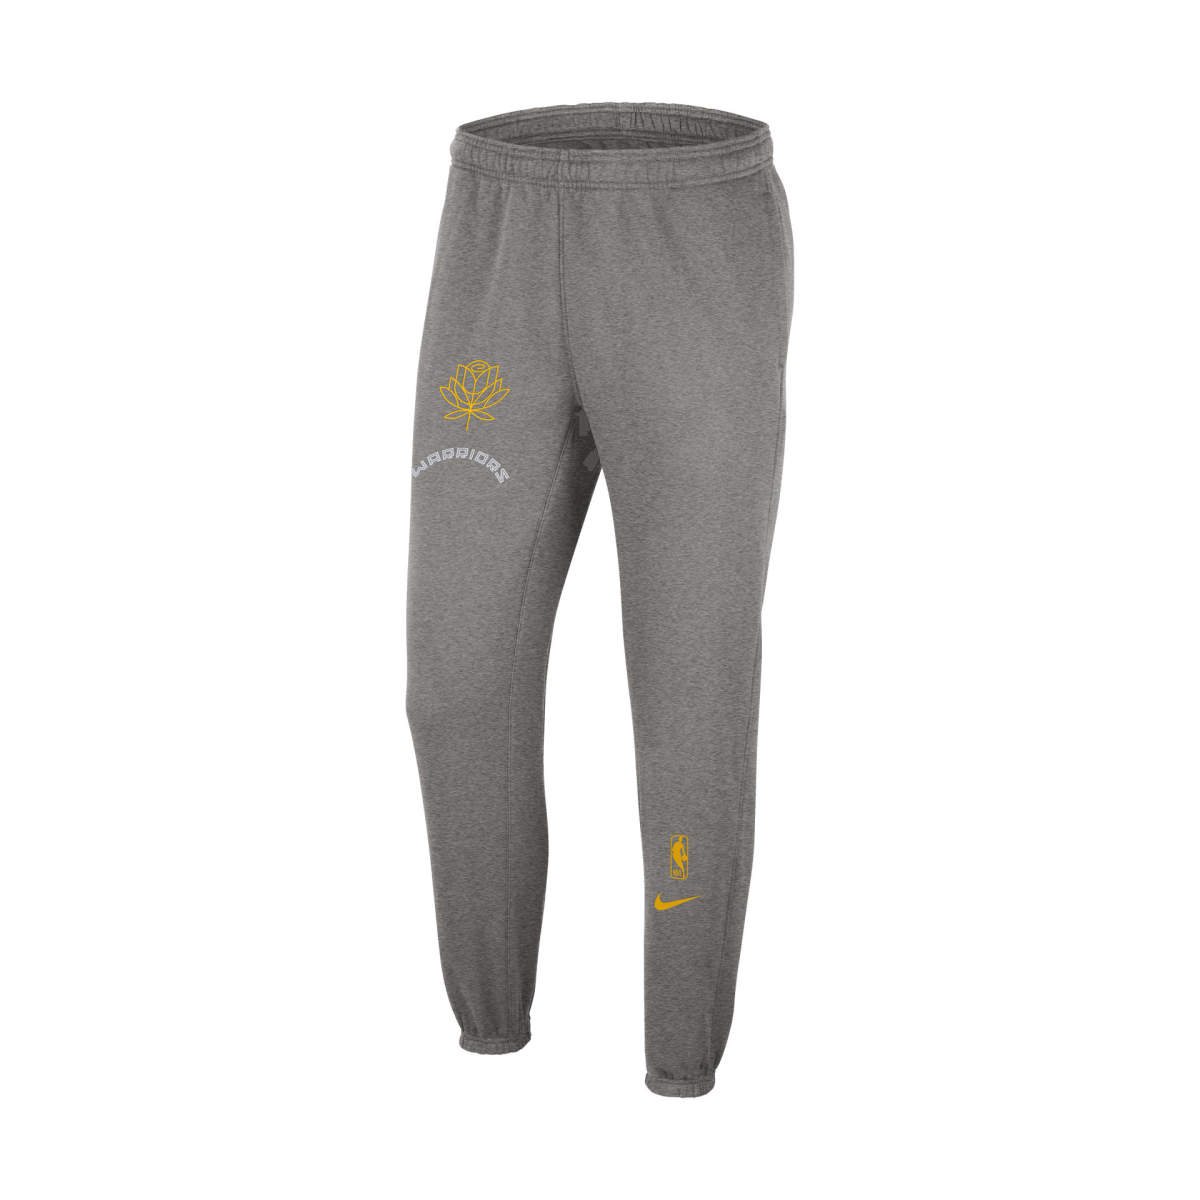 Golden state warriors ce courtside pant